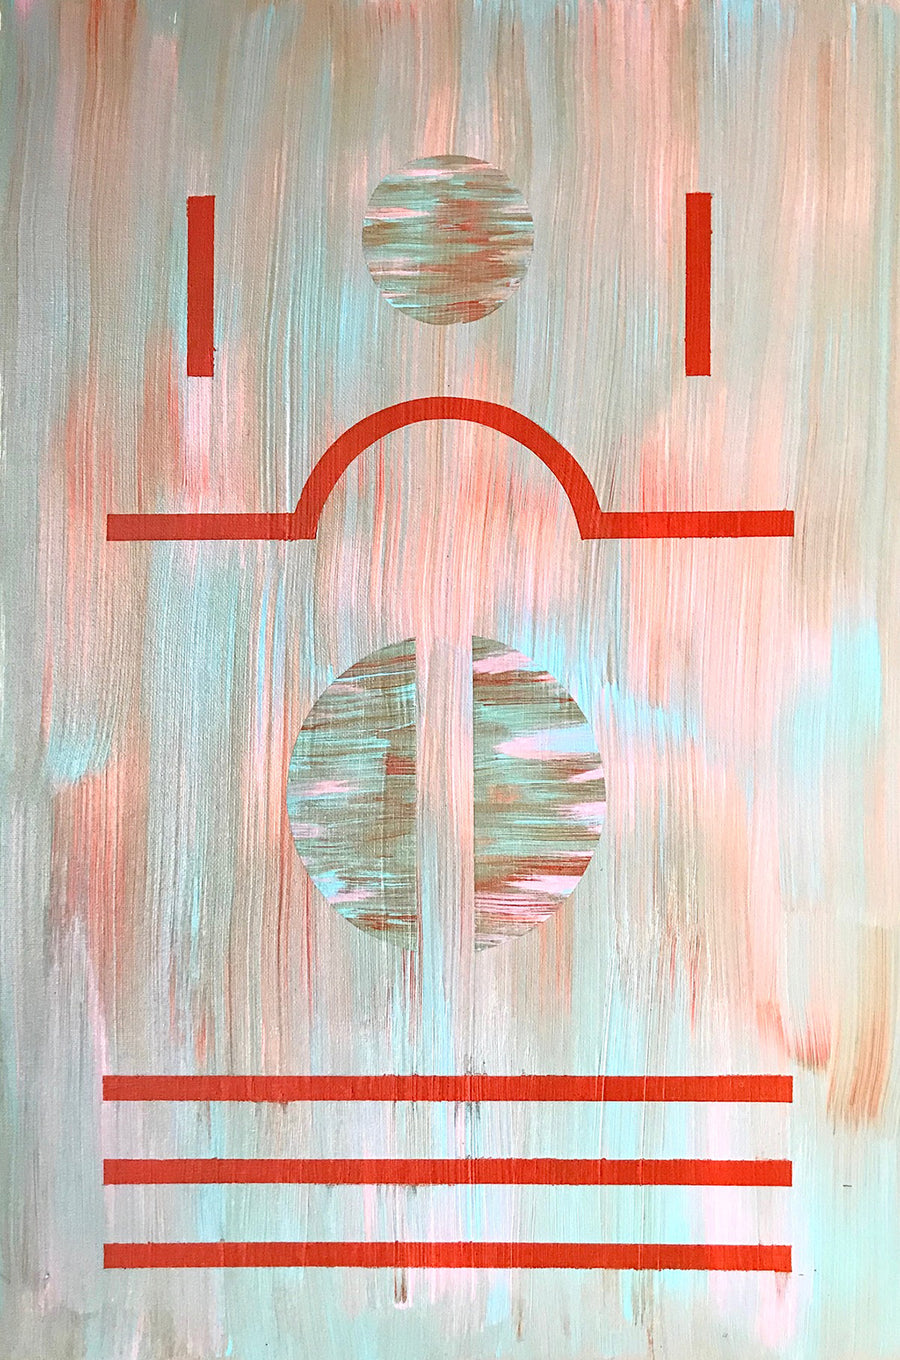 ‘Spin’ by Henriett Juhasz, is an Art Deco style painting of red, geometric lines and circles in a blur of pastel baby blue and pink.